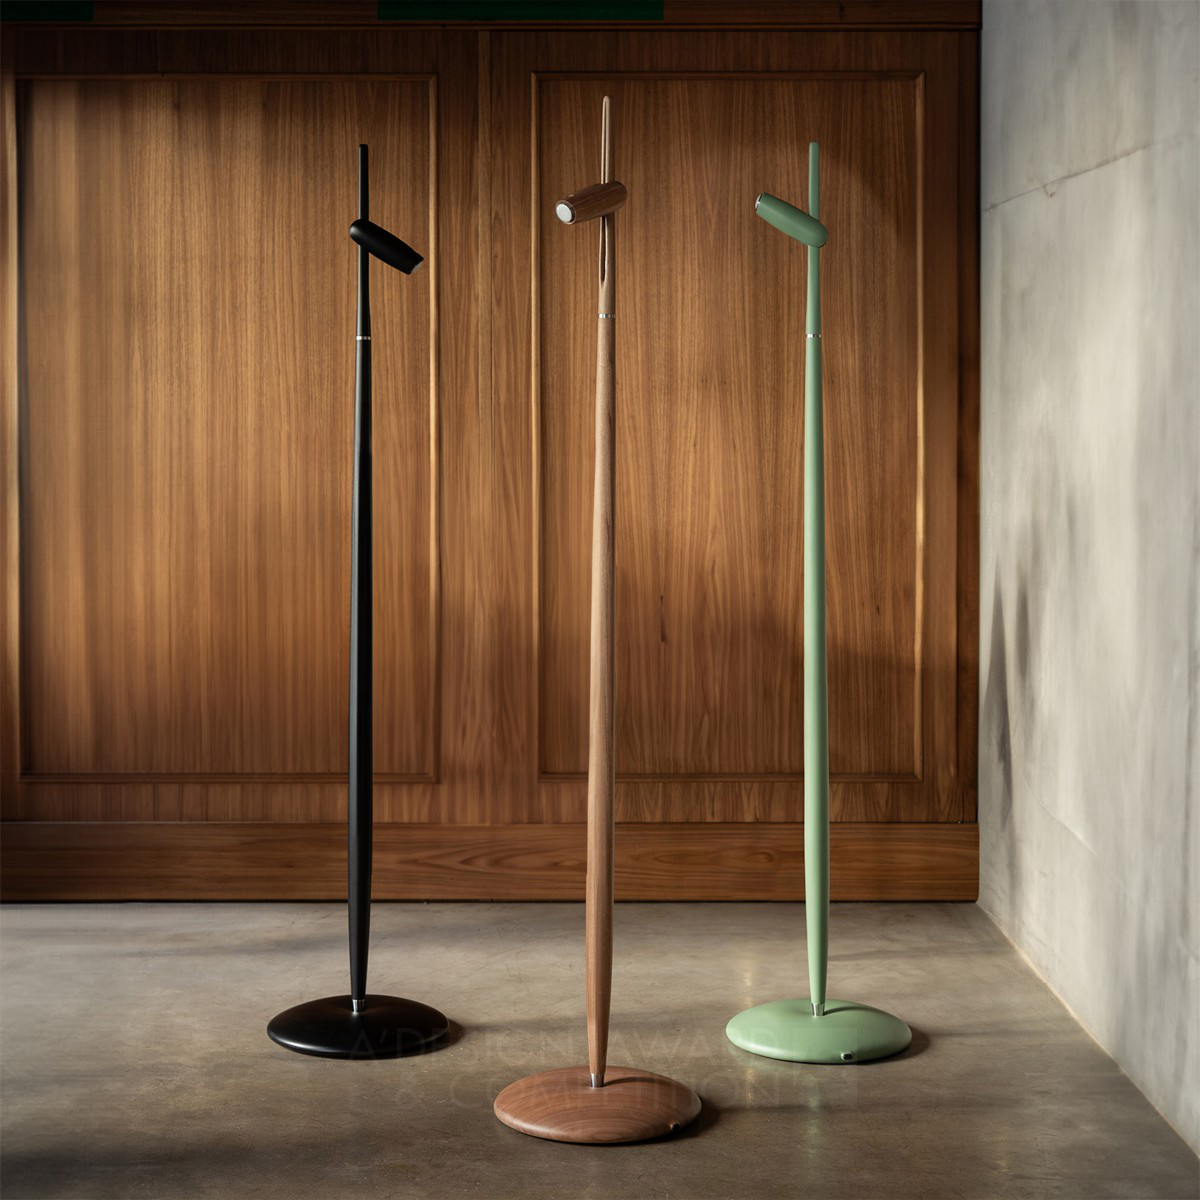 Bruno De Lazzari wins Golden at the prestigious A' Lighting Products and Fixtures Design Award with Grampo Lamp.